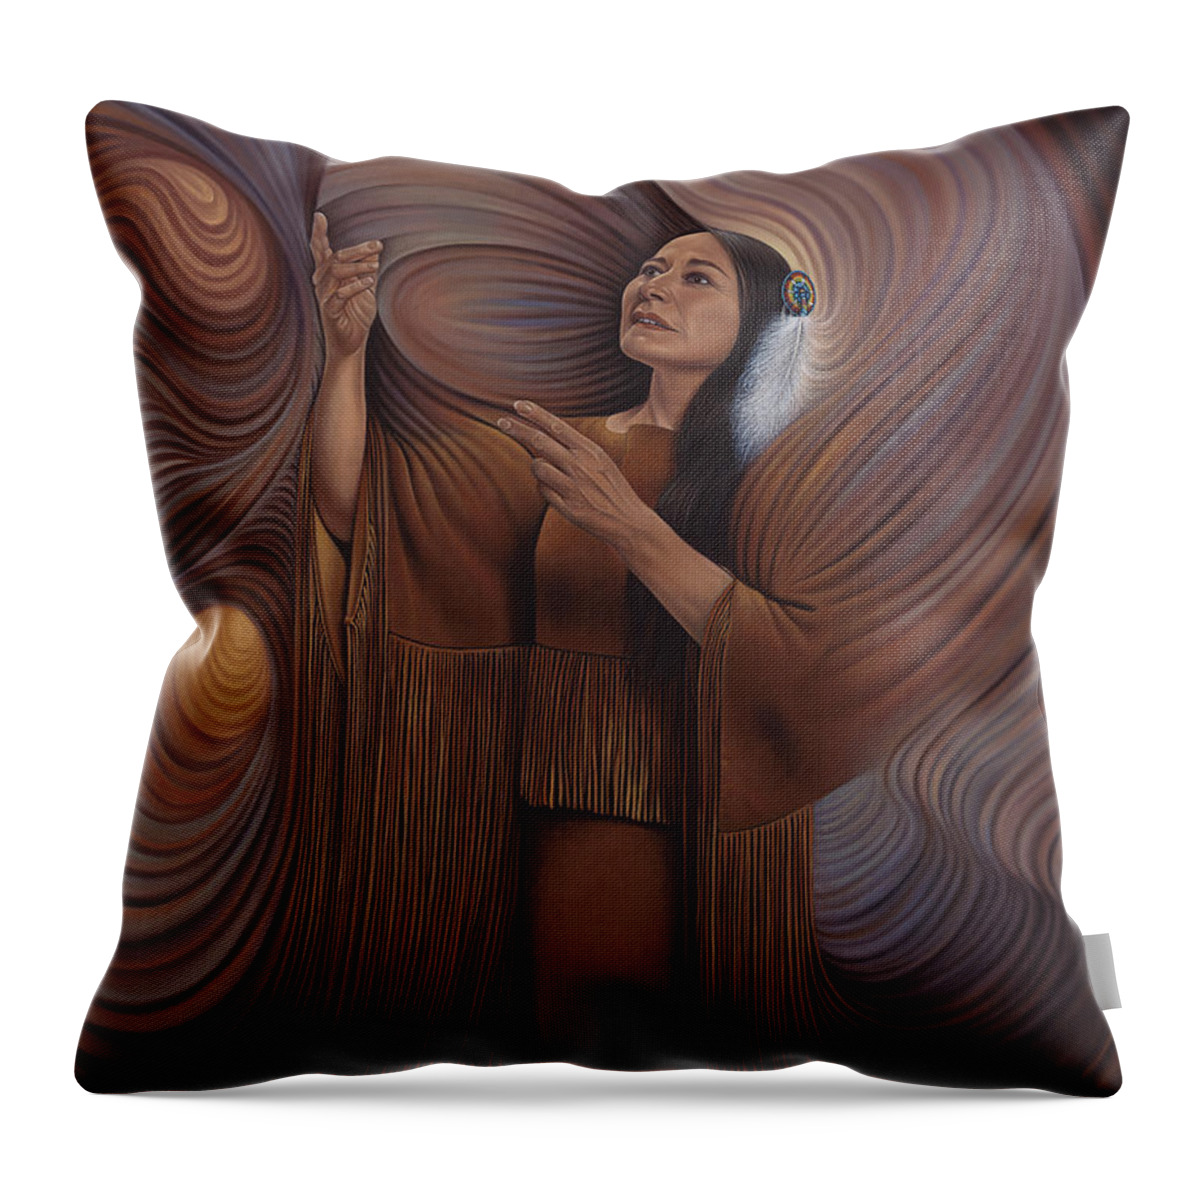 Bonnie-jo-hunt Throw Pillow featuring the painting On Sacred Ground Series V by Ricardo Chavez-Mendez